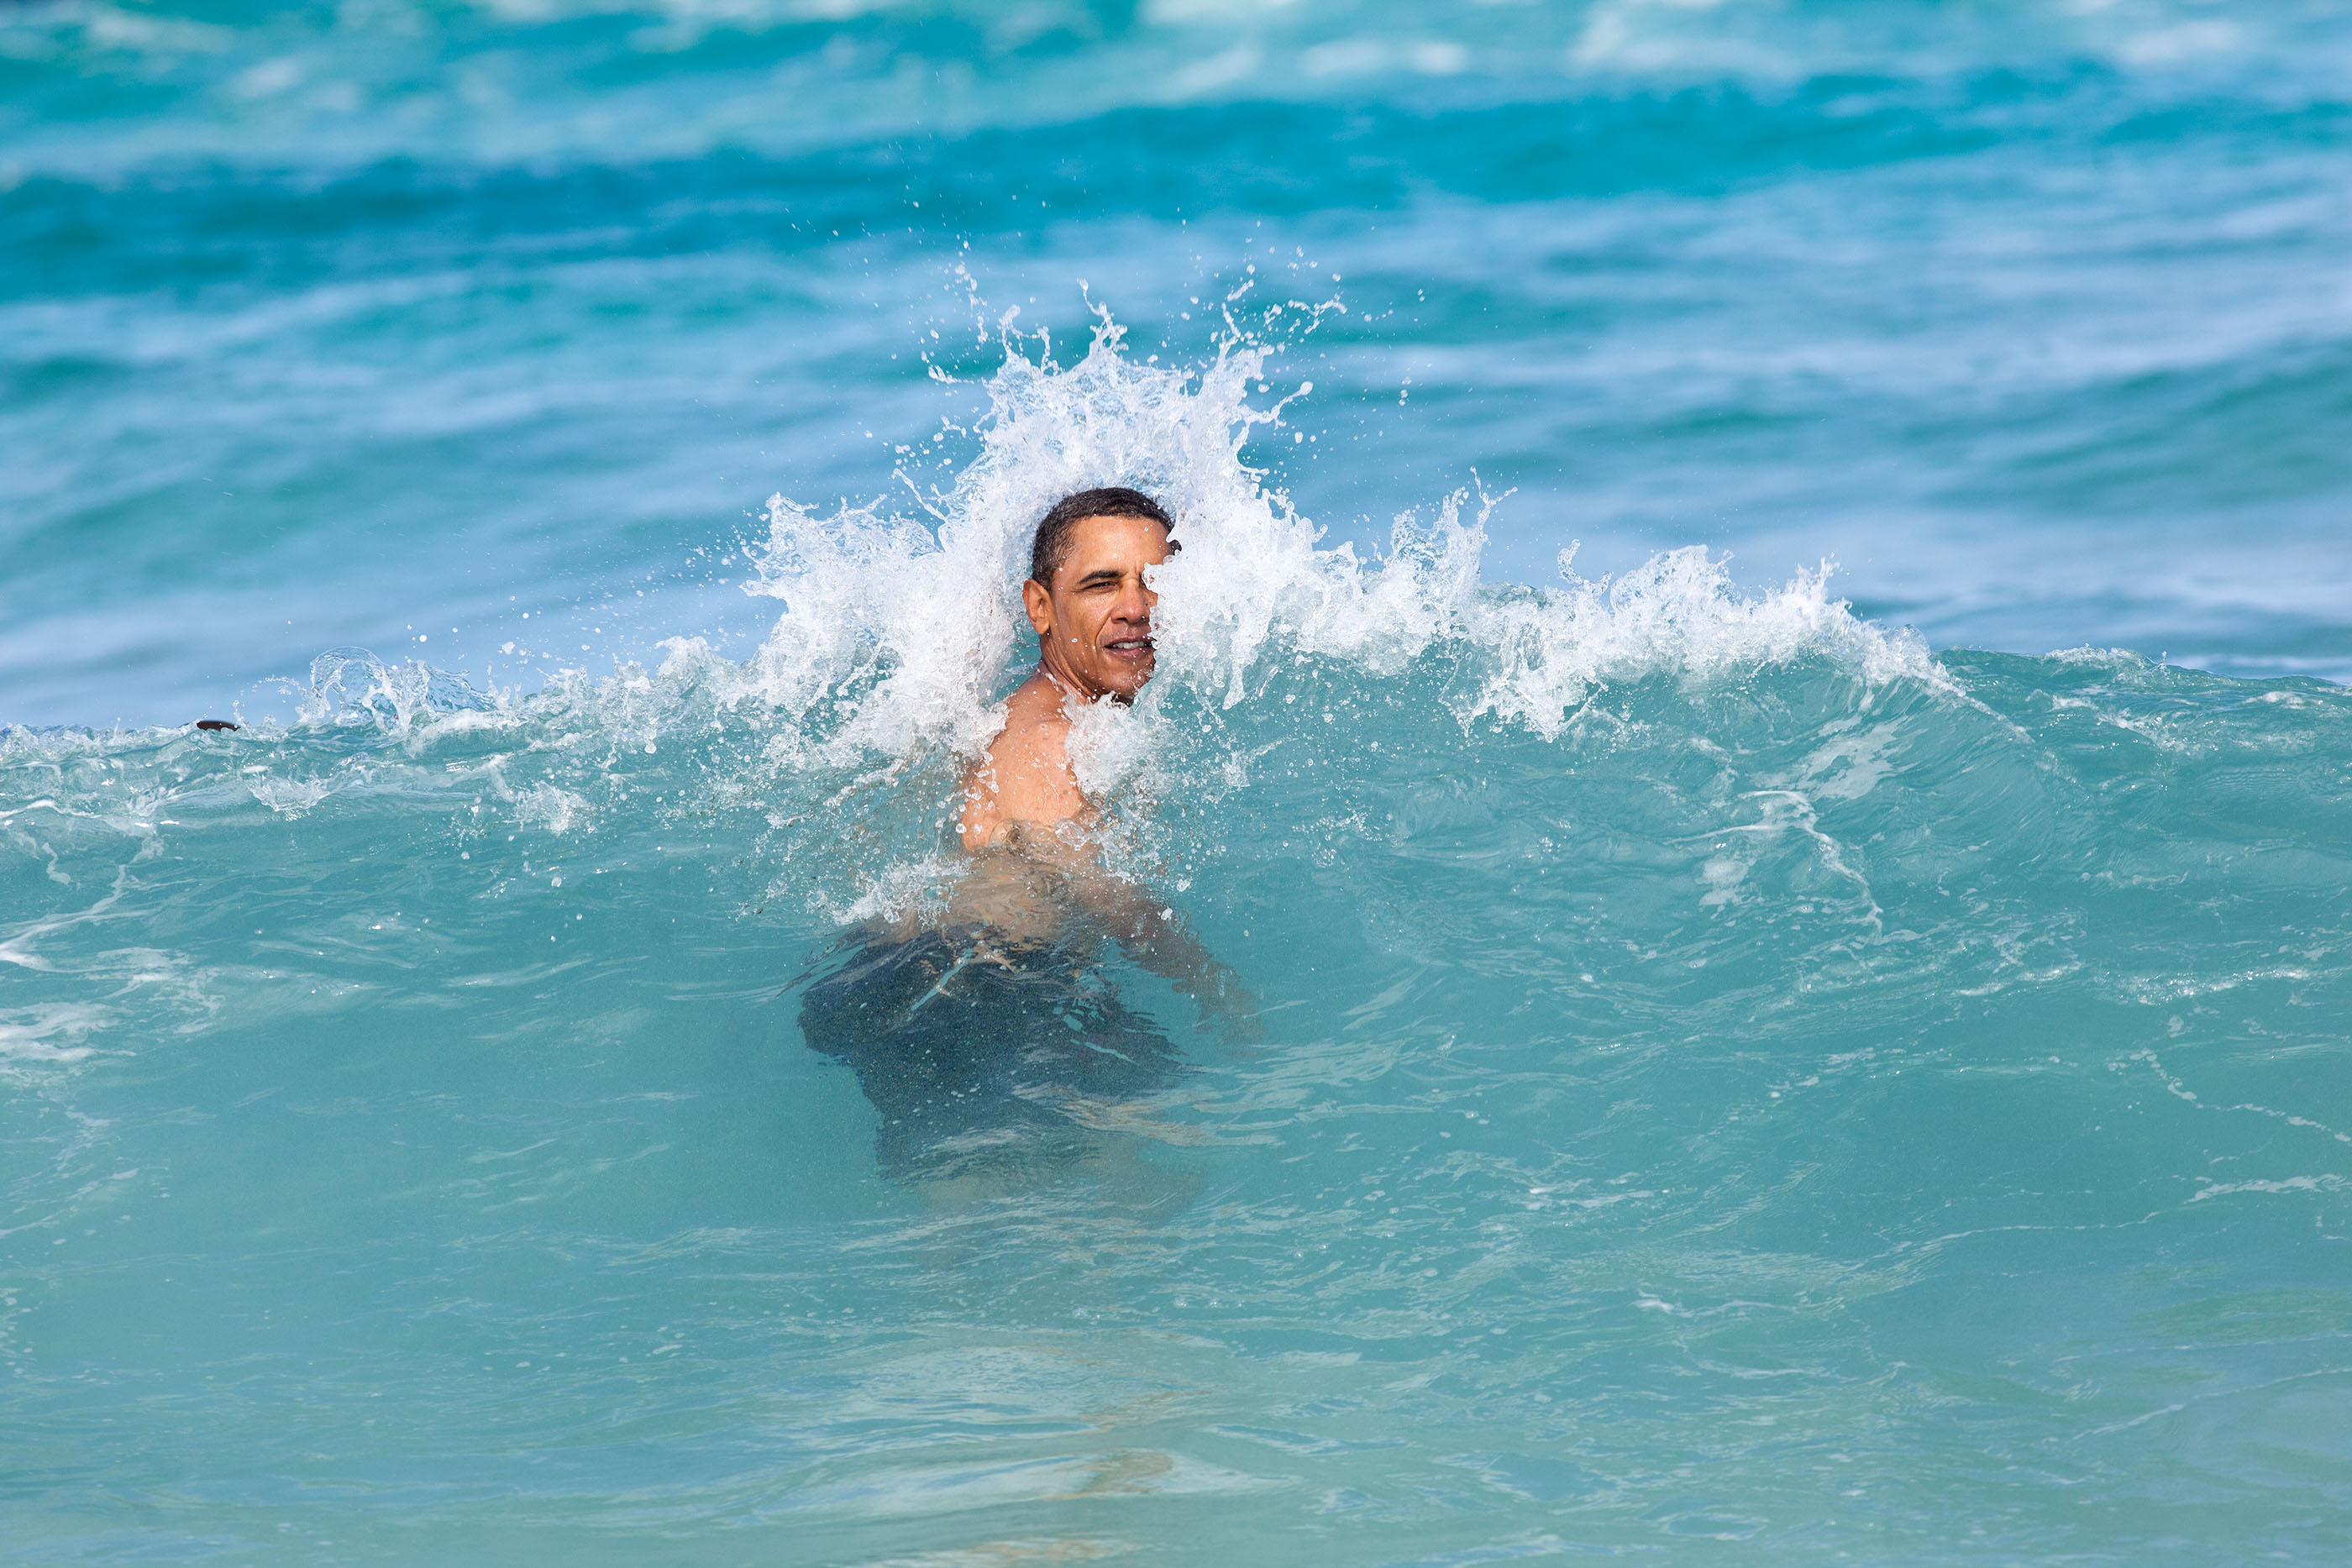 Hawaii, Jan. 1, 2012. Swimming at Pyramid Rock Beach in Kaneohe Bay. (Official White House Photo by Pete Souza)